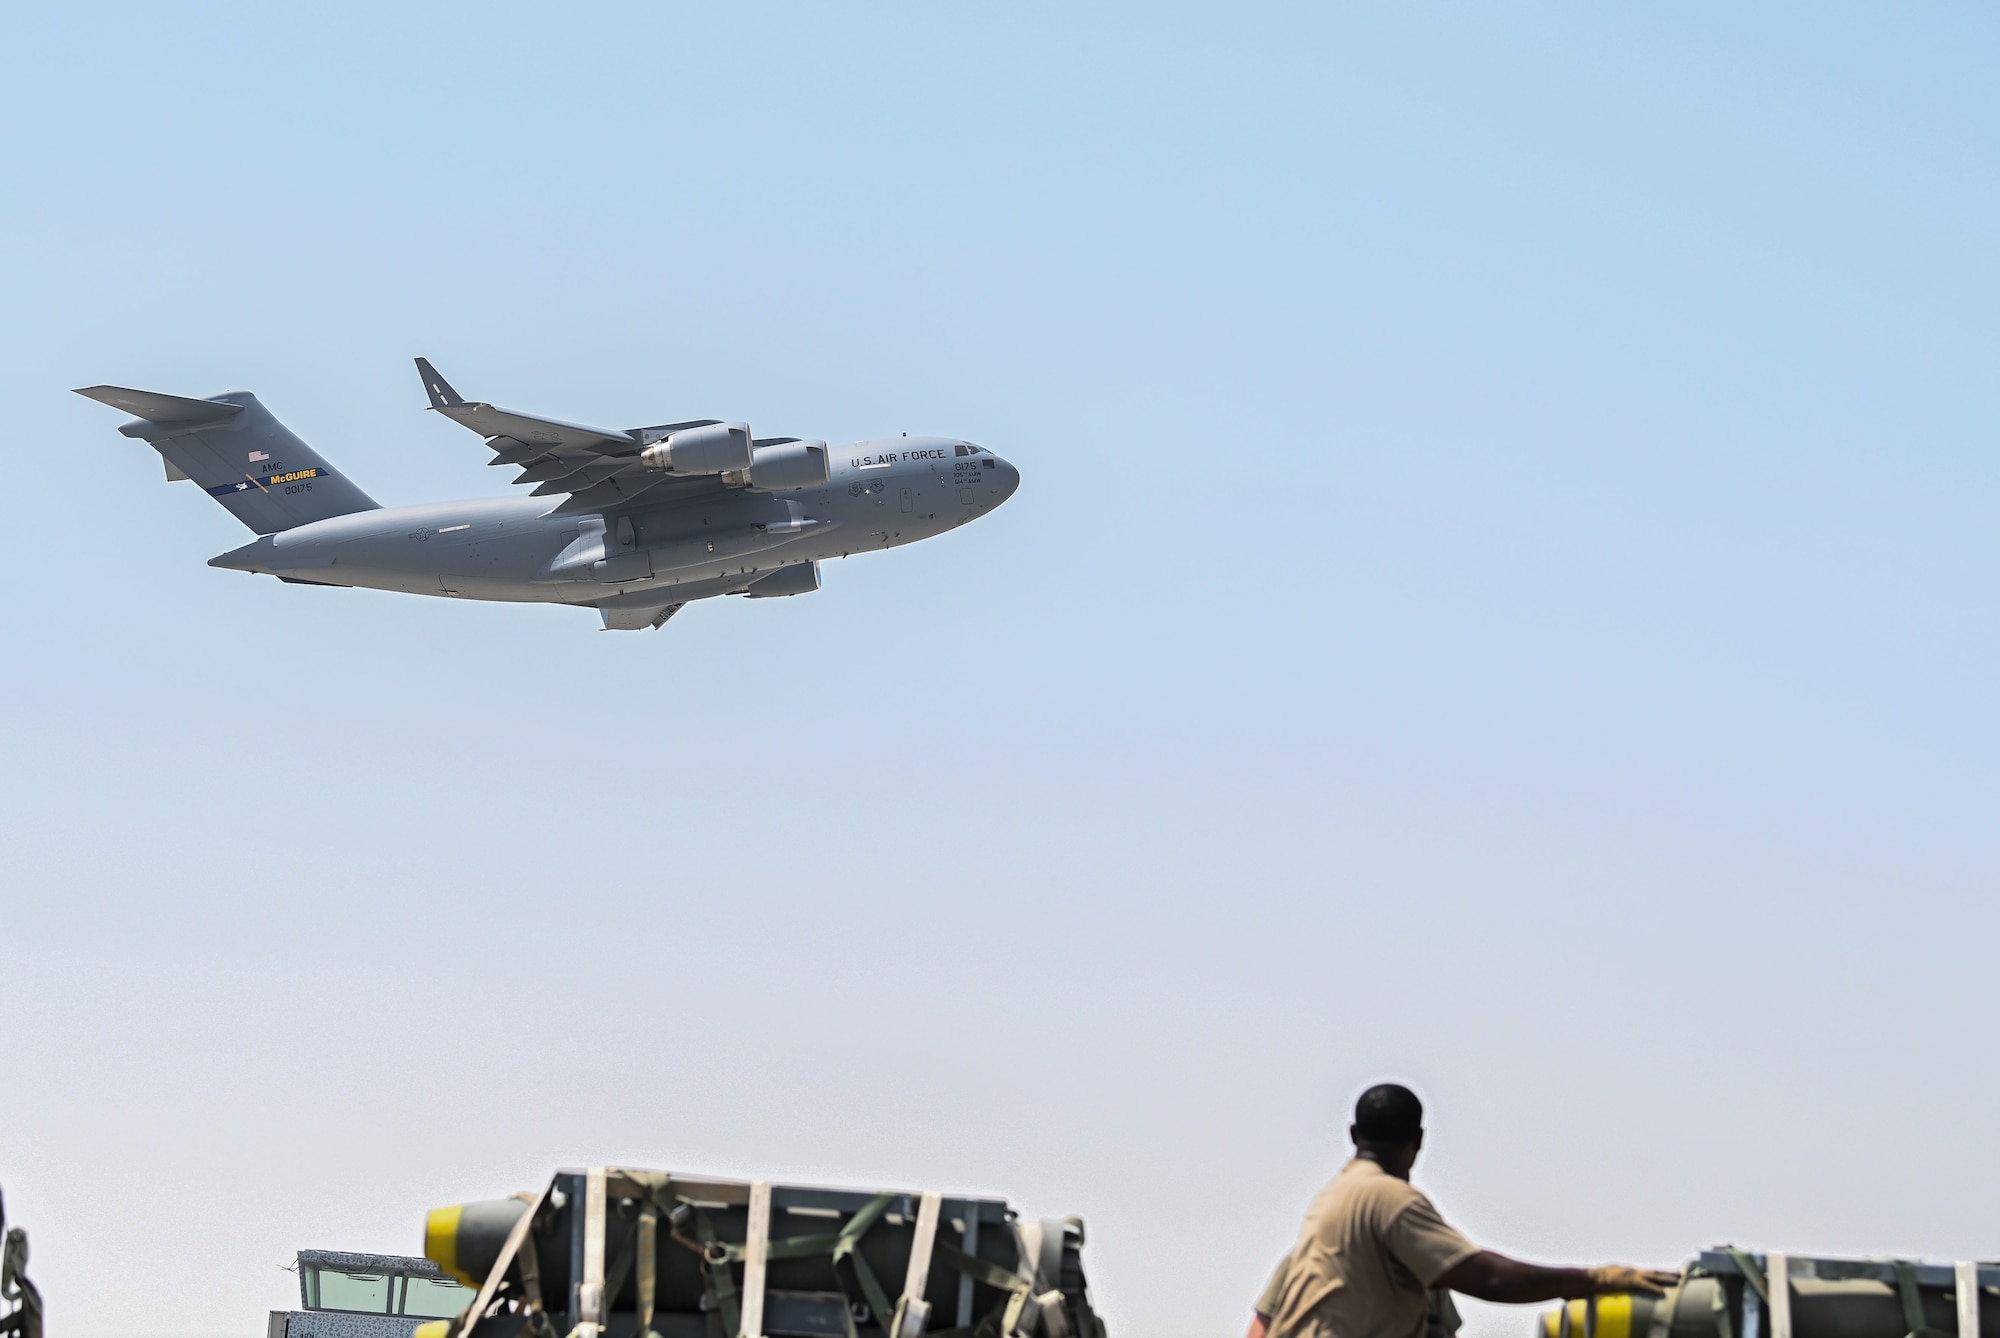 Airmen from the 379th Expeditionary Logistics Readiness Squadron transport munitions as a C-17 Globemaster III aircraft flies by Sept. 20, 2022 at Al Udeid Air Base, Qatar. The 379th ERLS ground transport team moved munitions from the munitions storage area to a staging area where they were later loaded onto a C-17. (U.S. Air National Guard photo by Master Sgt. Michael J. Kelly)